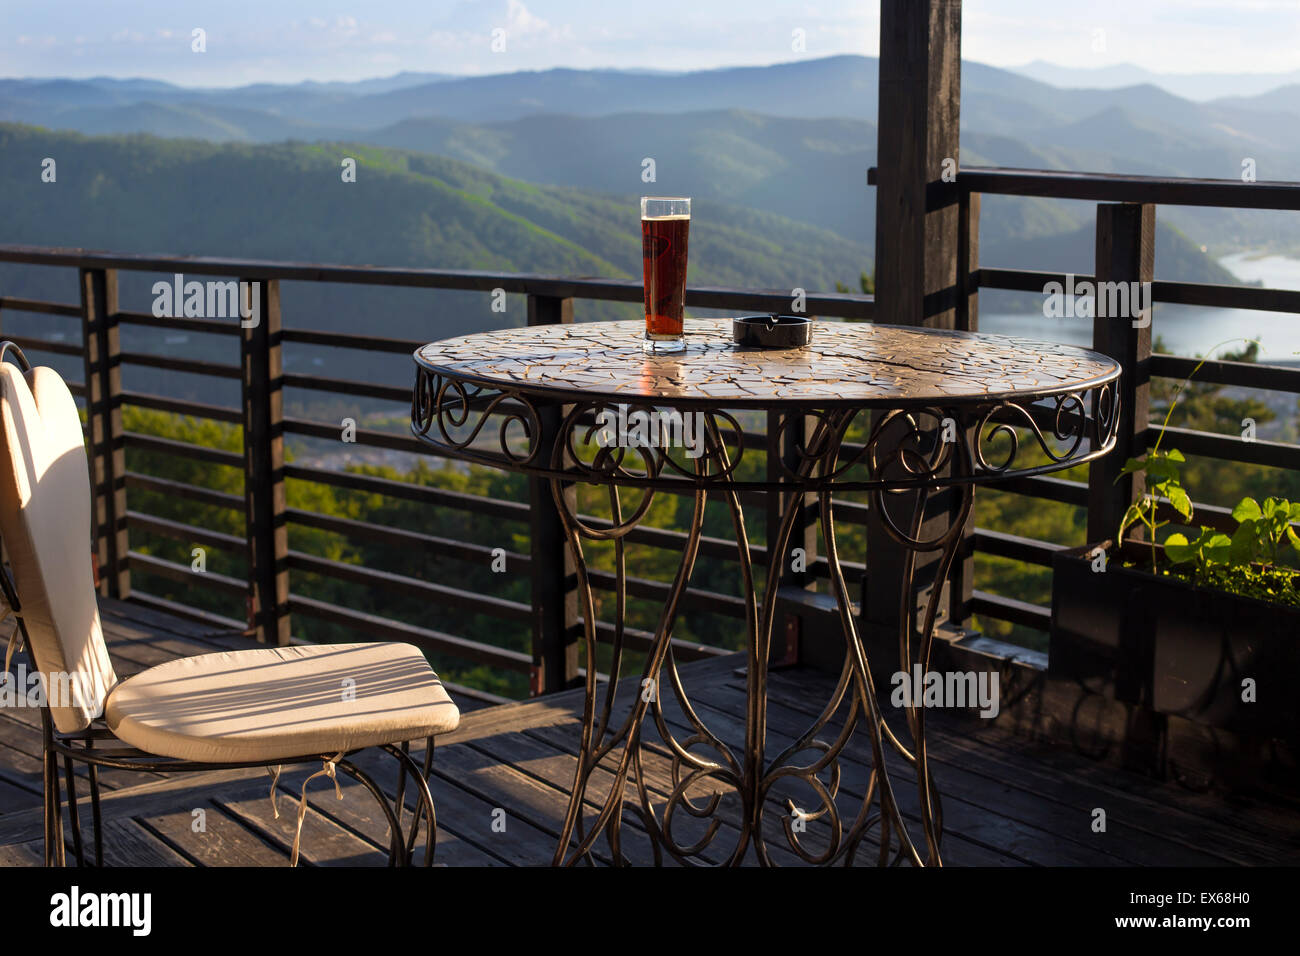 Beer glass on the bar table at the open-air cafe in mountains Stock Photo